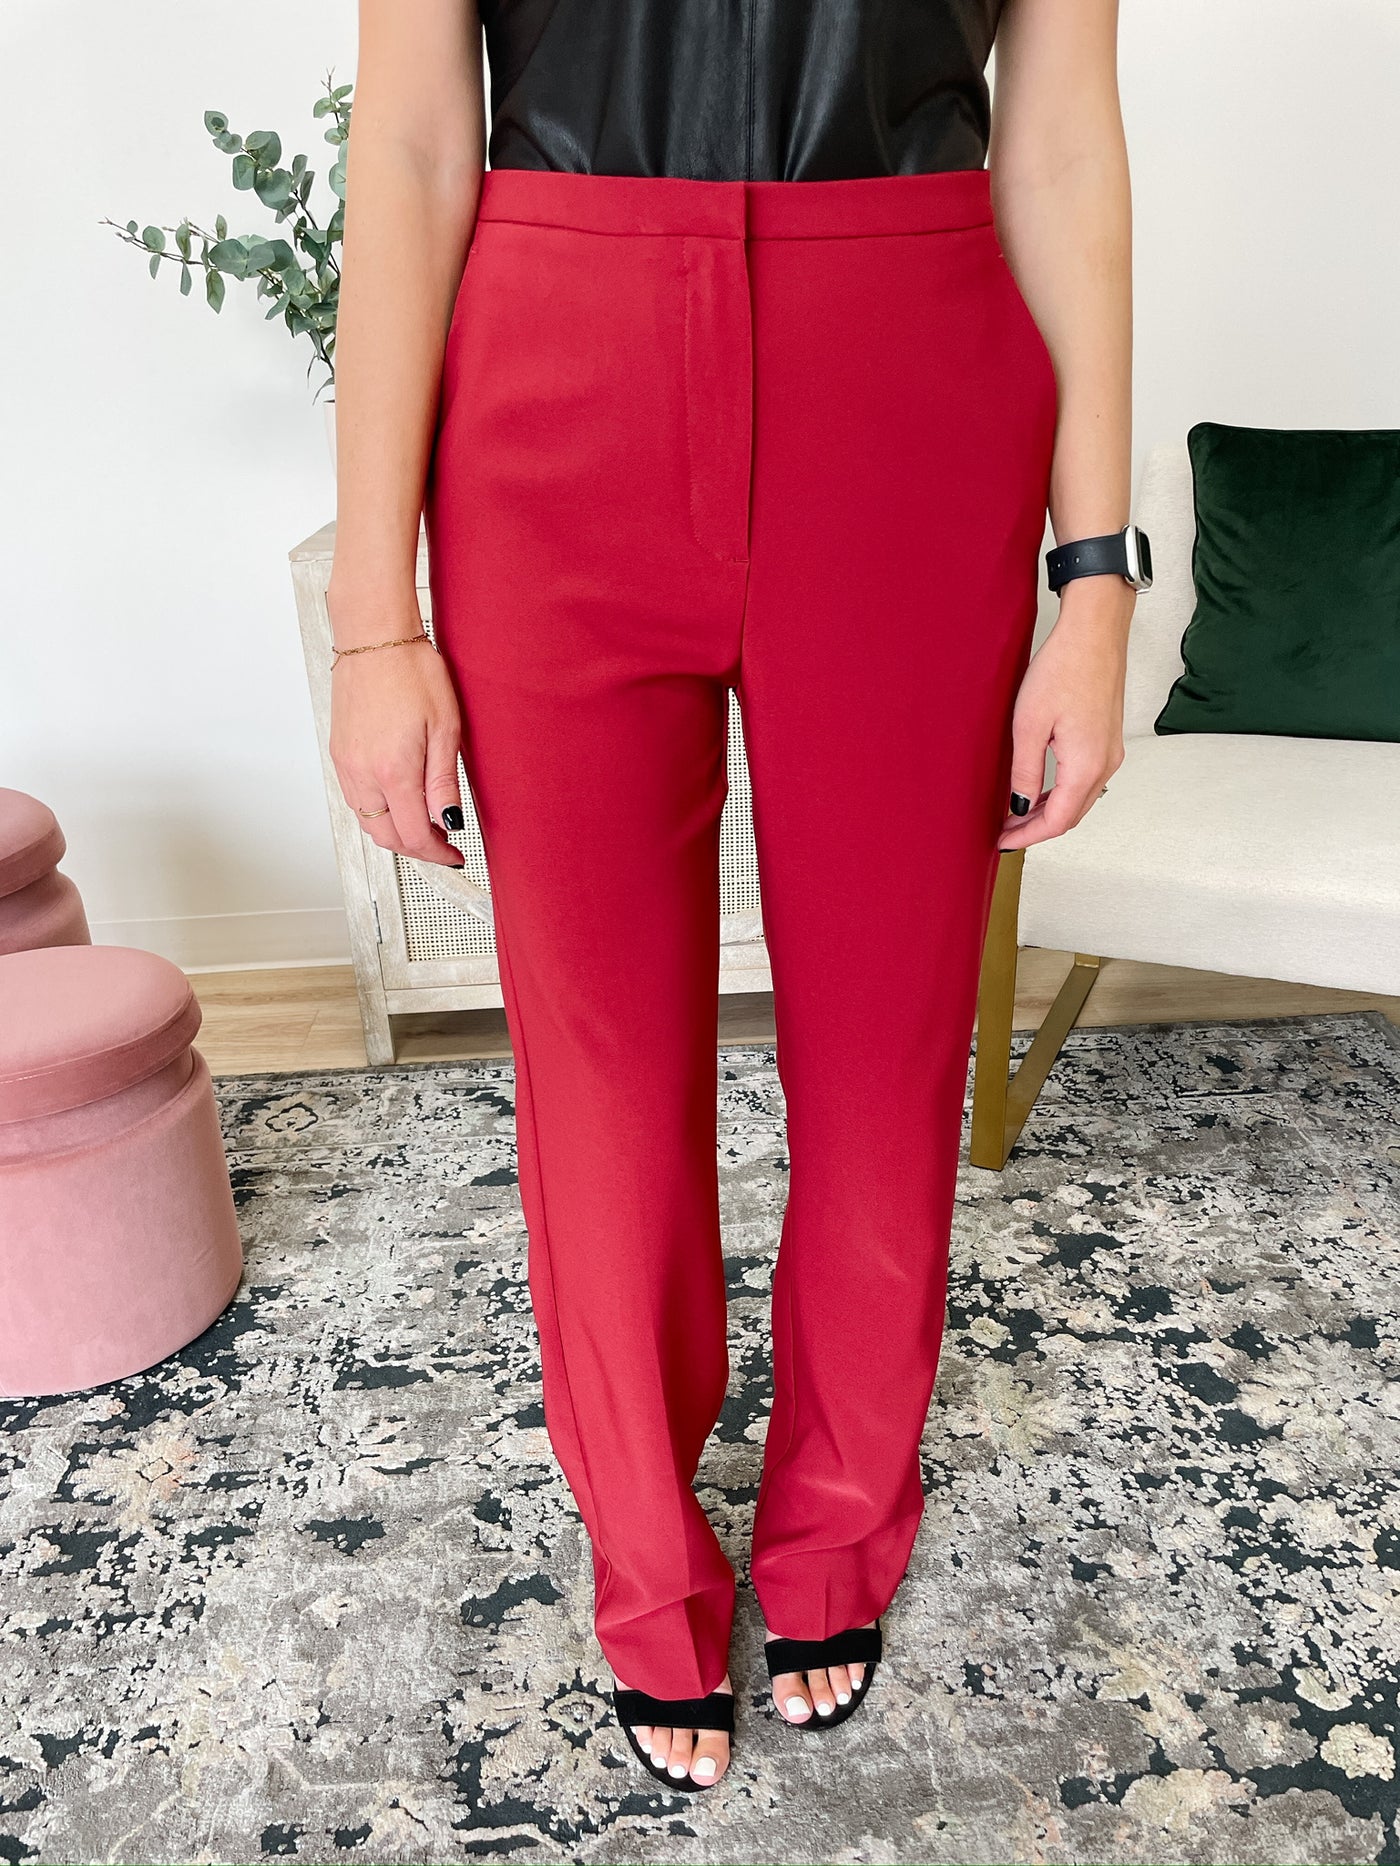 THE FORMAL STRAIGHT LEG WORK PANT IN SANGRIA